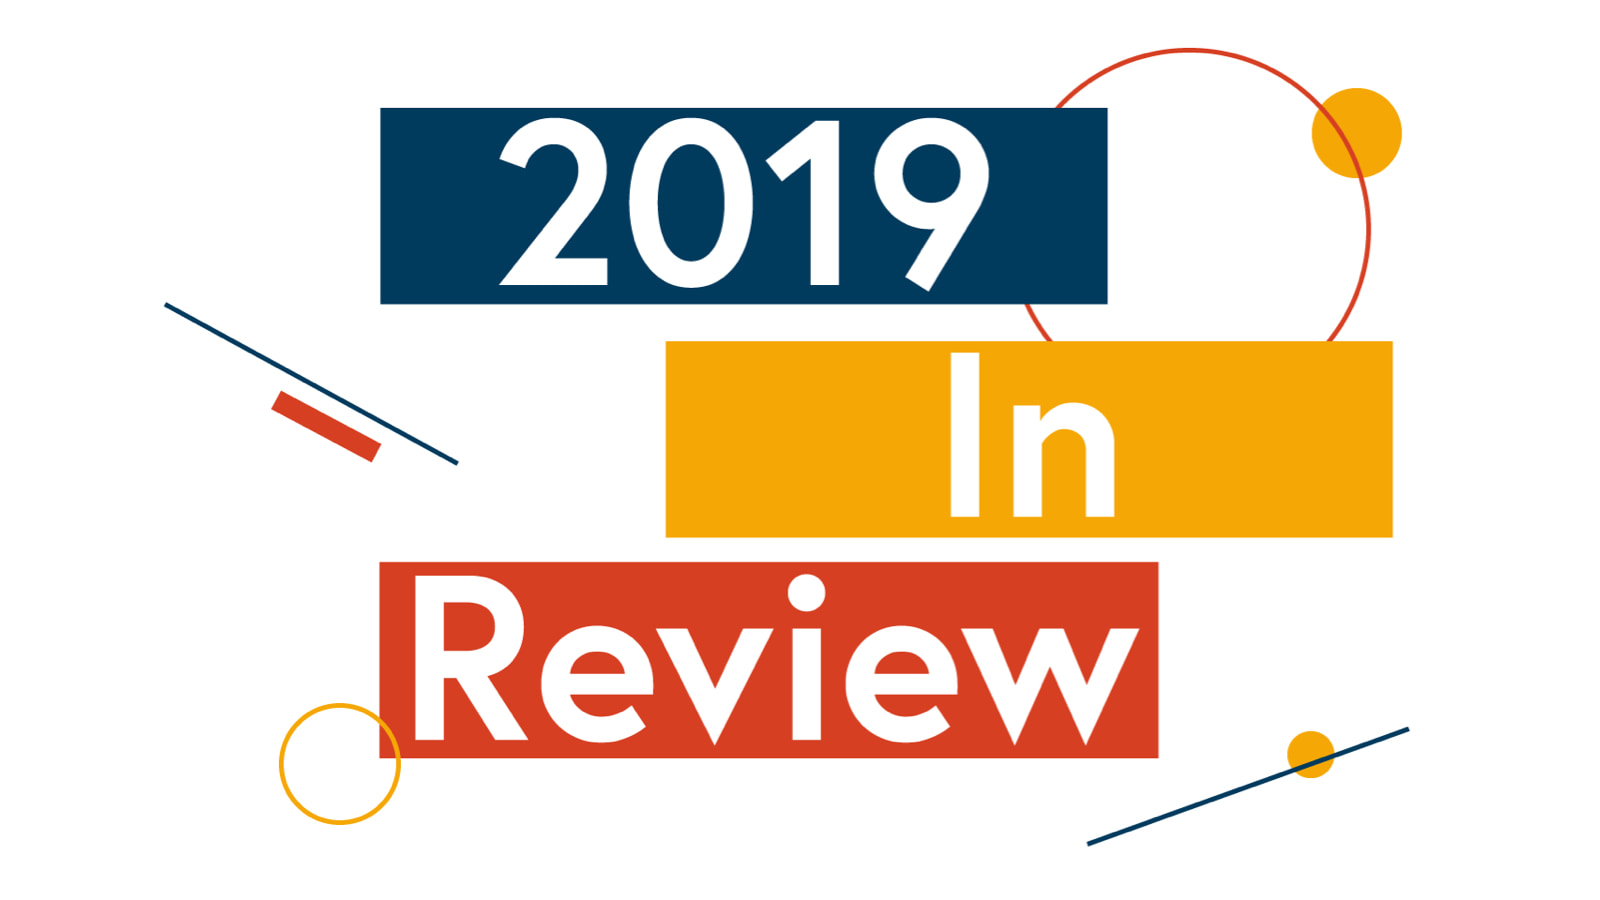 2019 in Review inside rectangular boxes